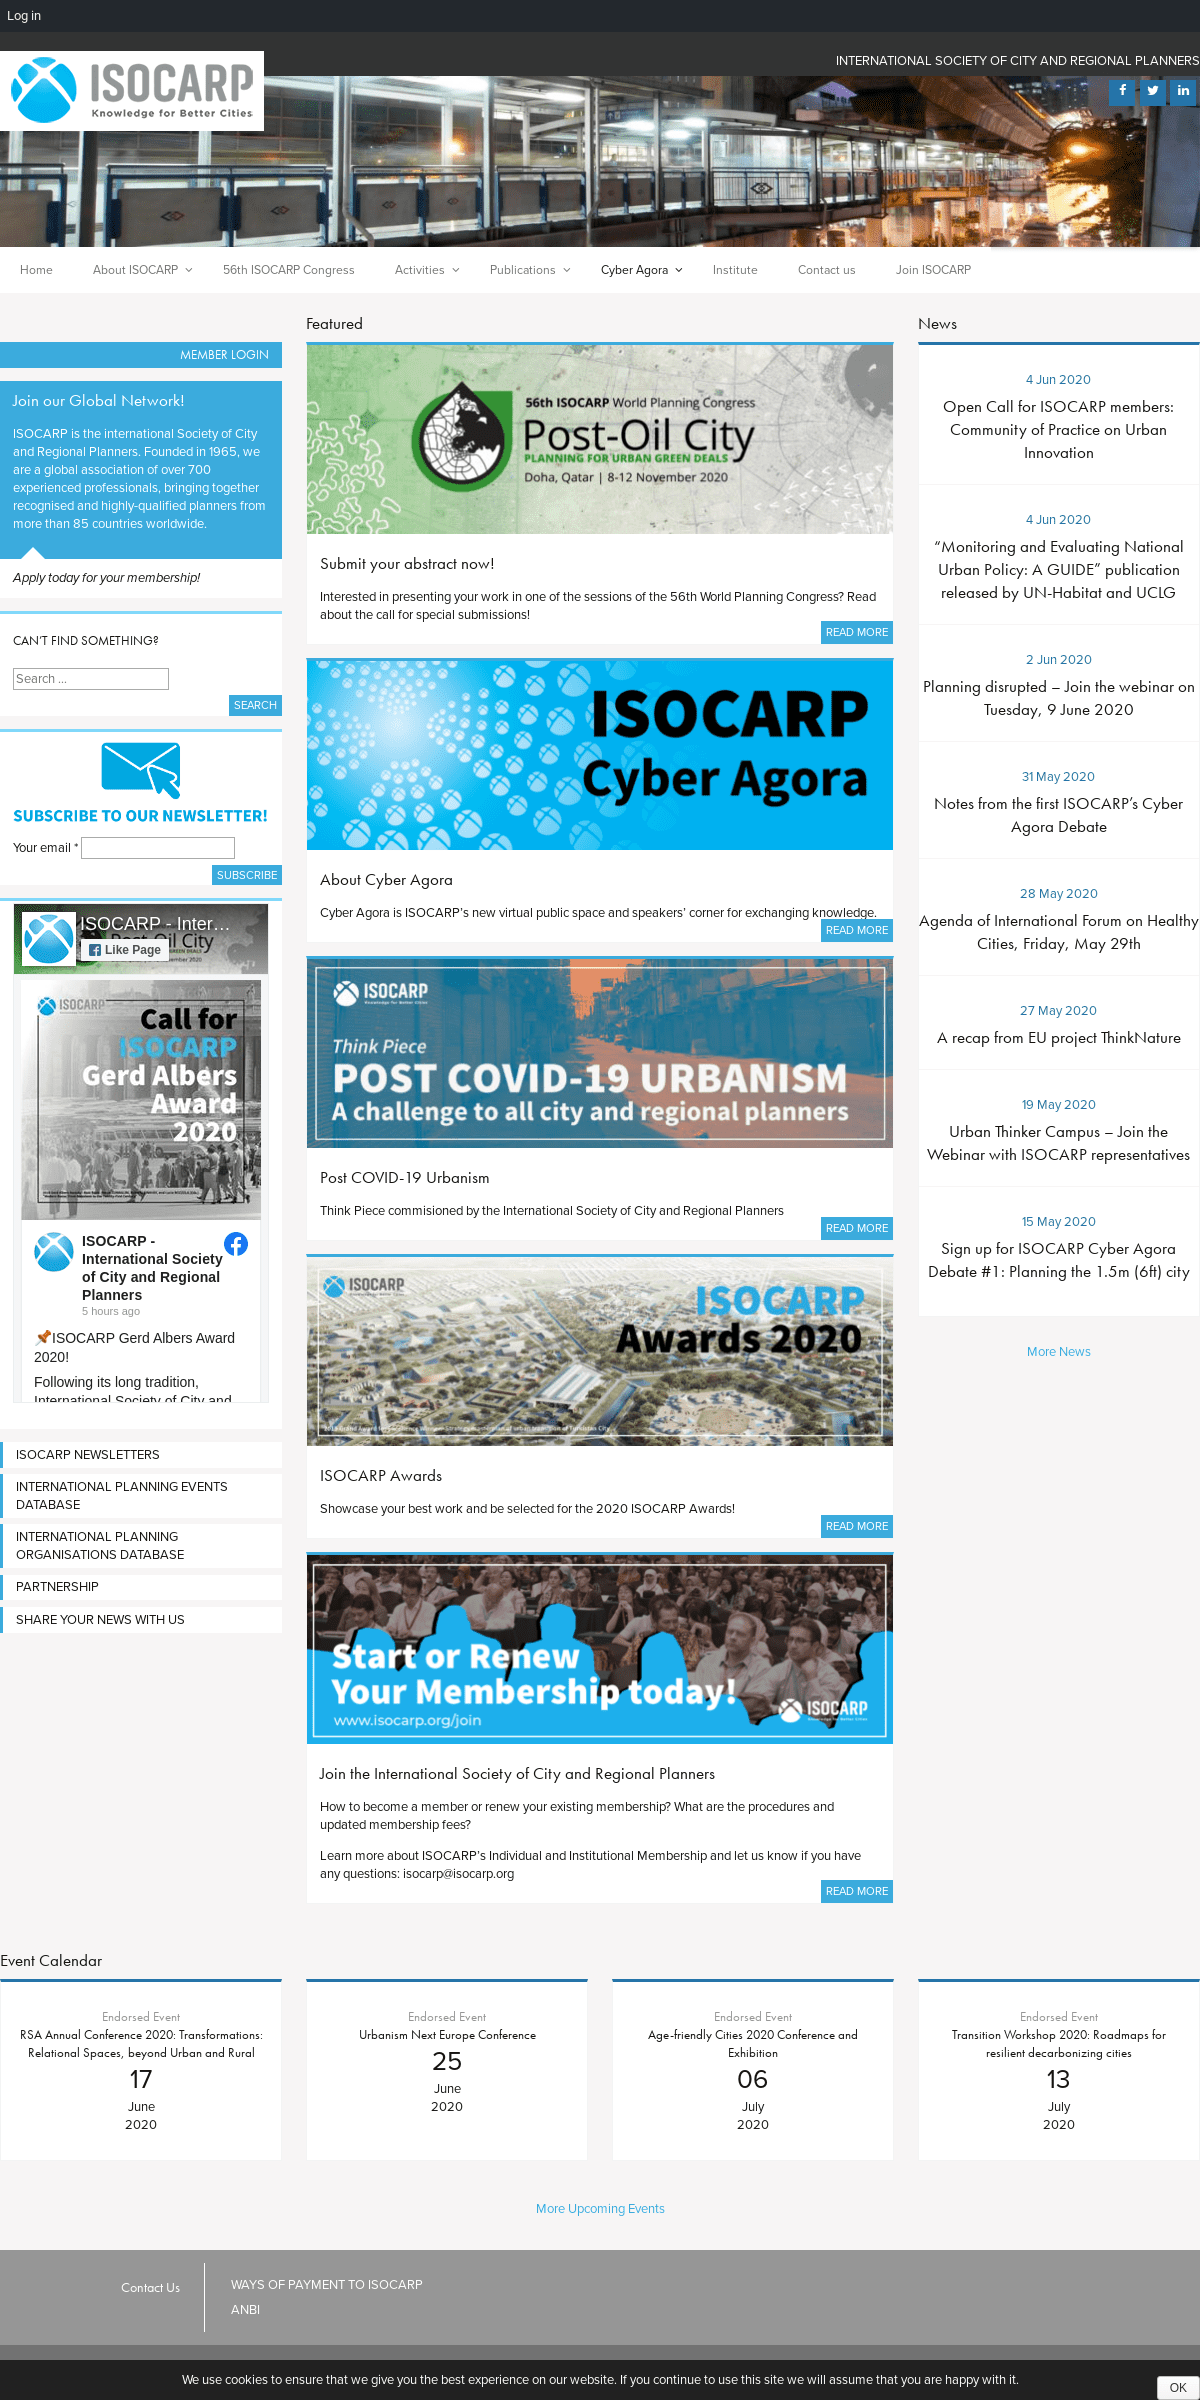 A complete backup of isocarp.org